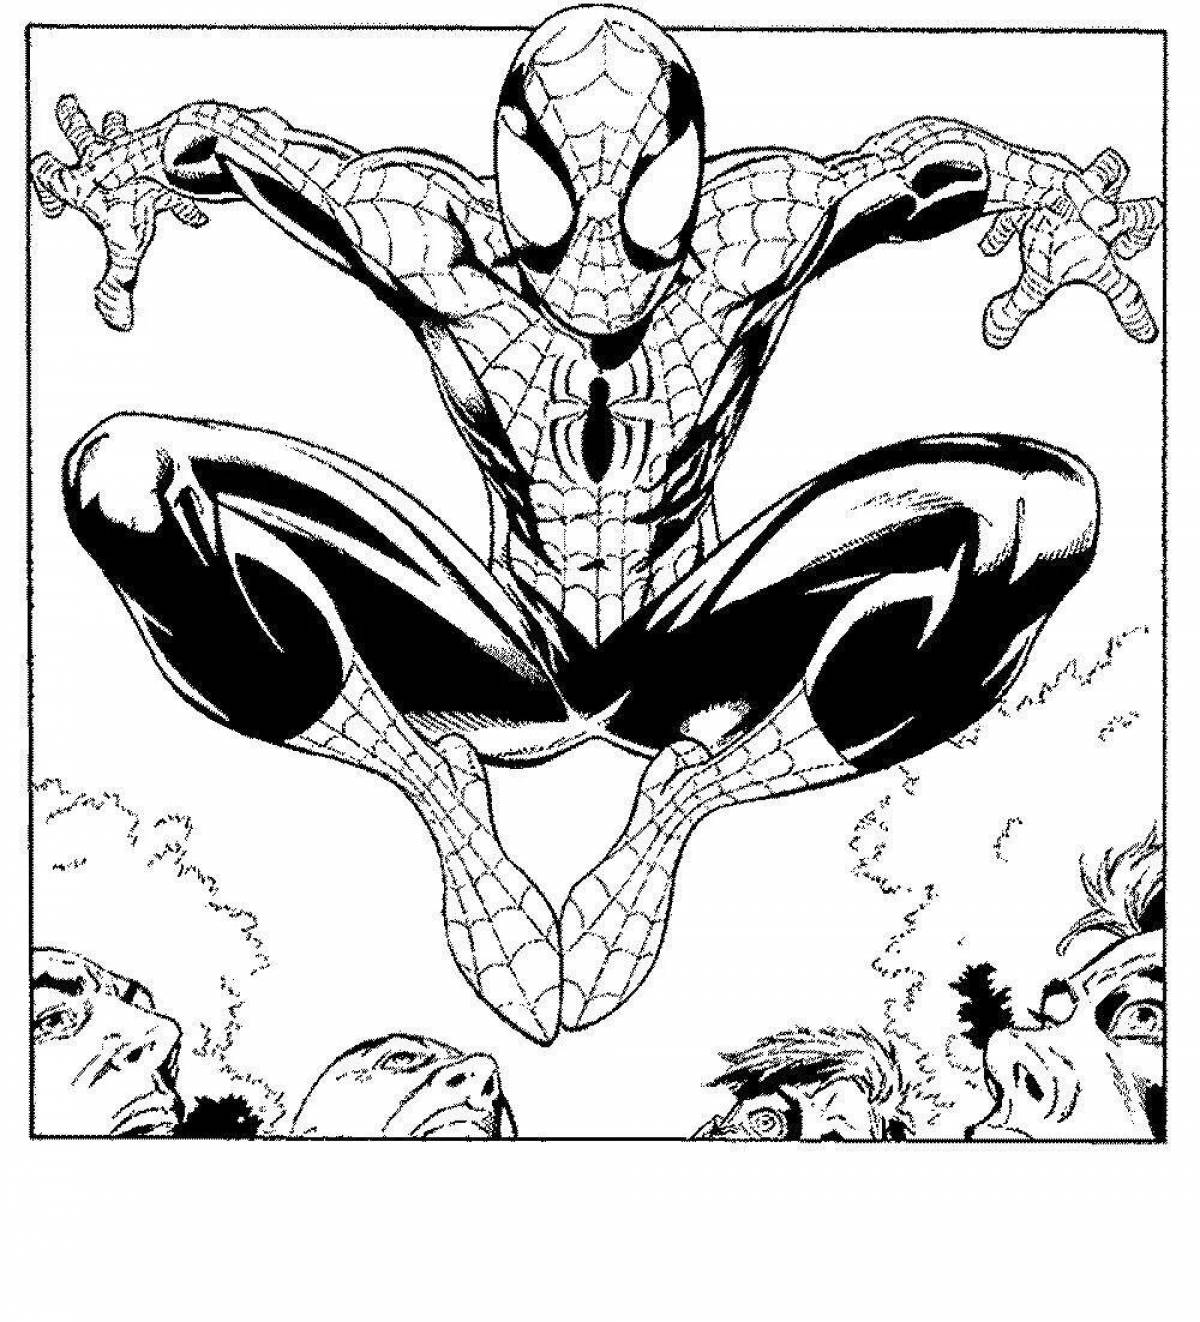 Spiderman coloring book full of action